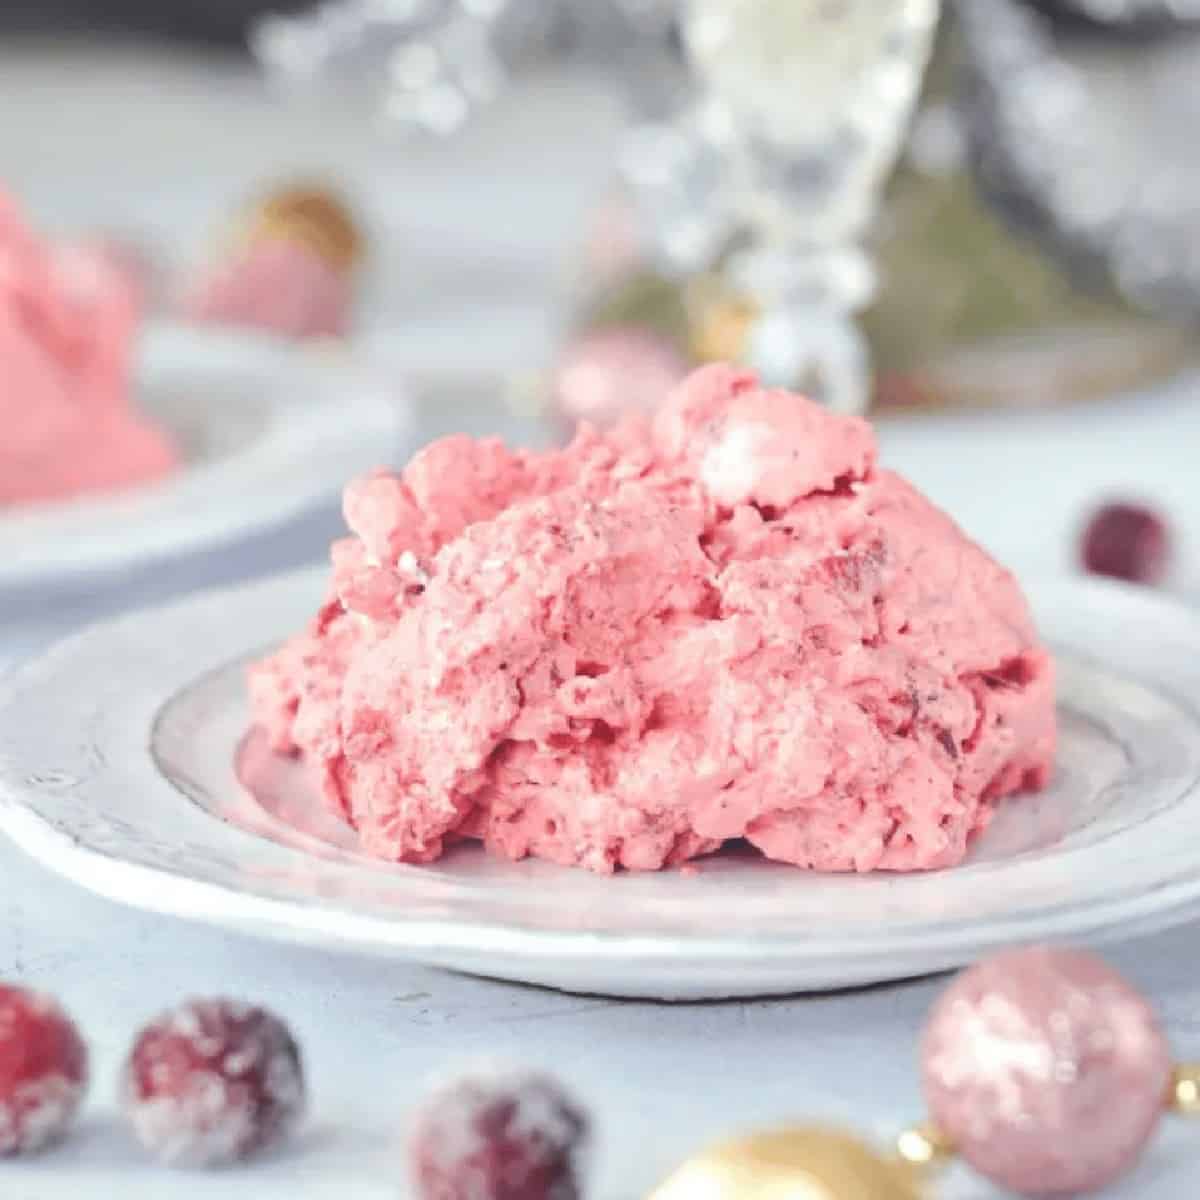 Cranberry fluff on a serving plate.